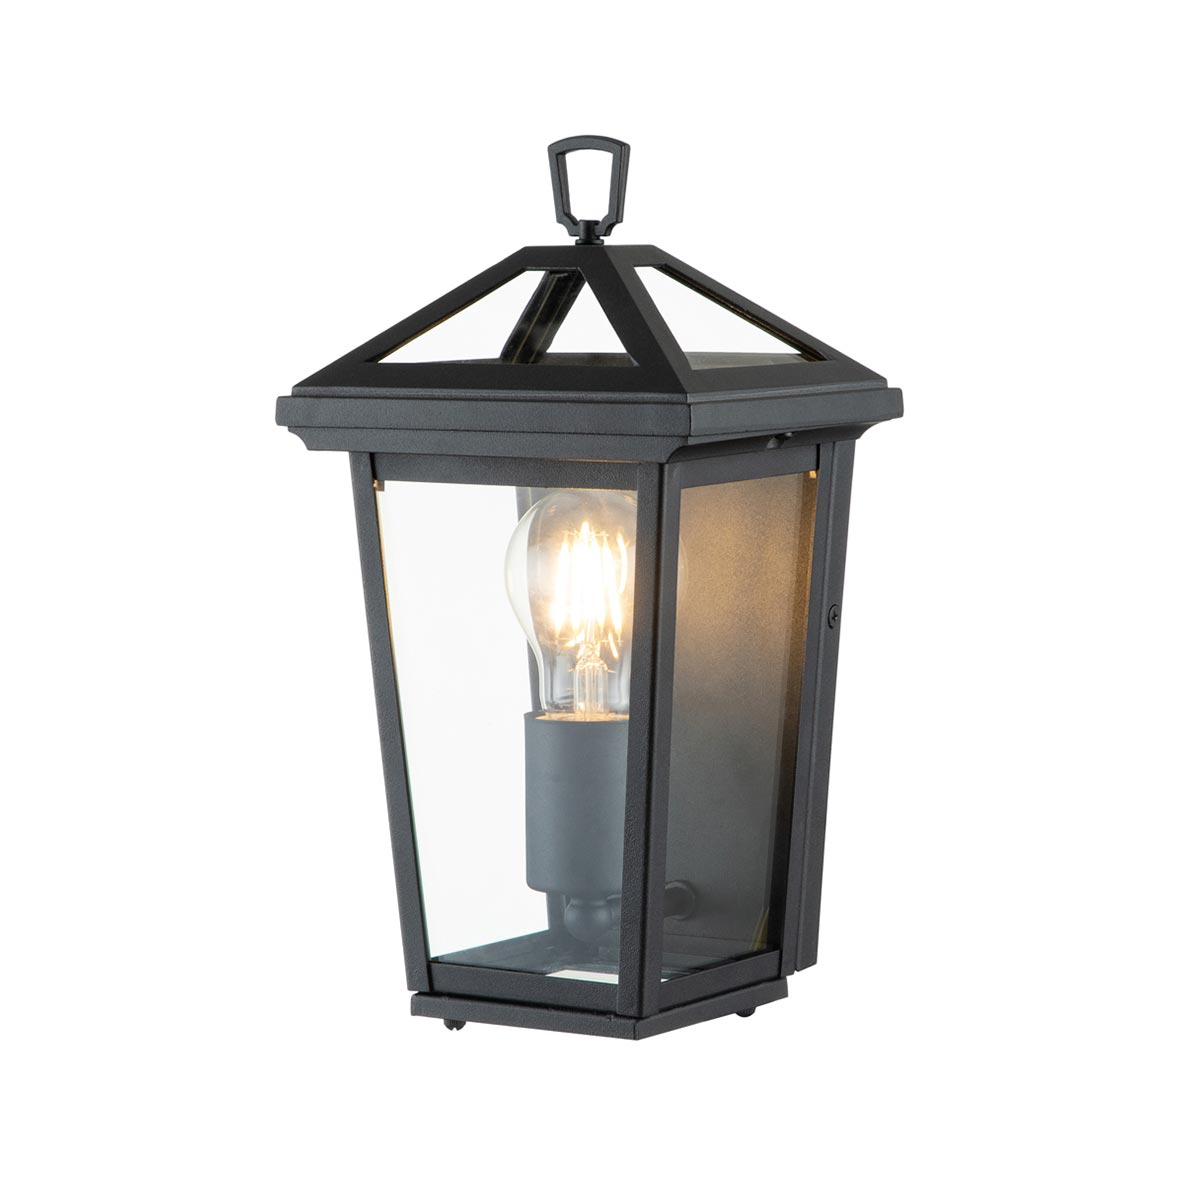 Quintiesse Alford Place 1 Light Outdoor Wall Half Lantern Museum Black